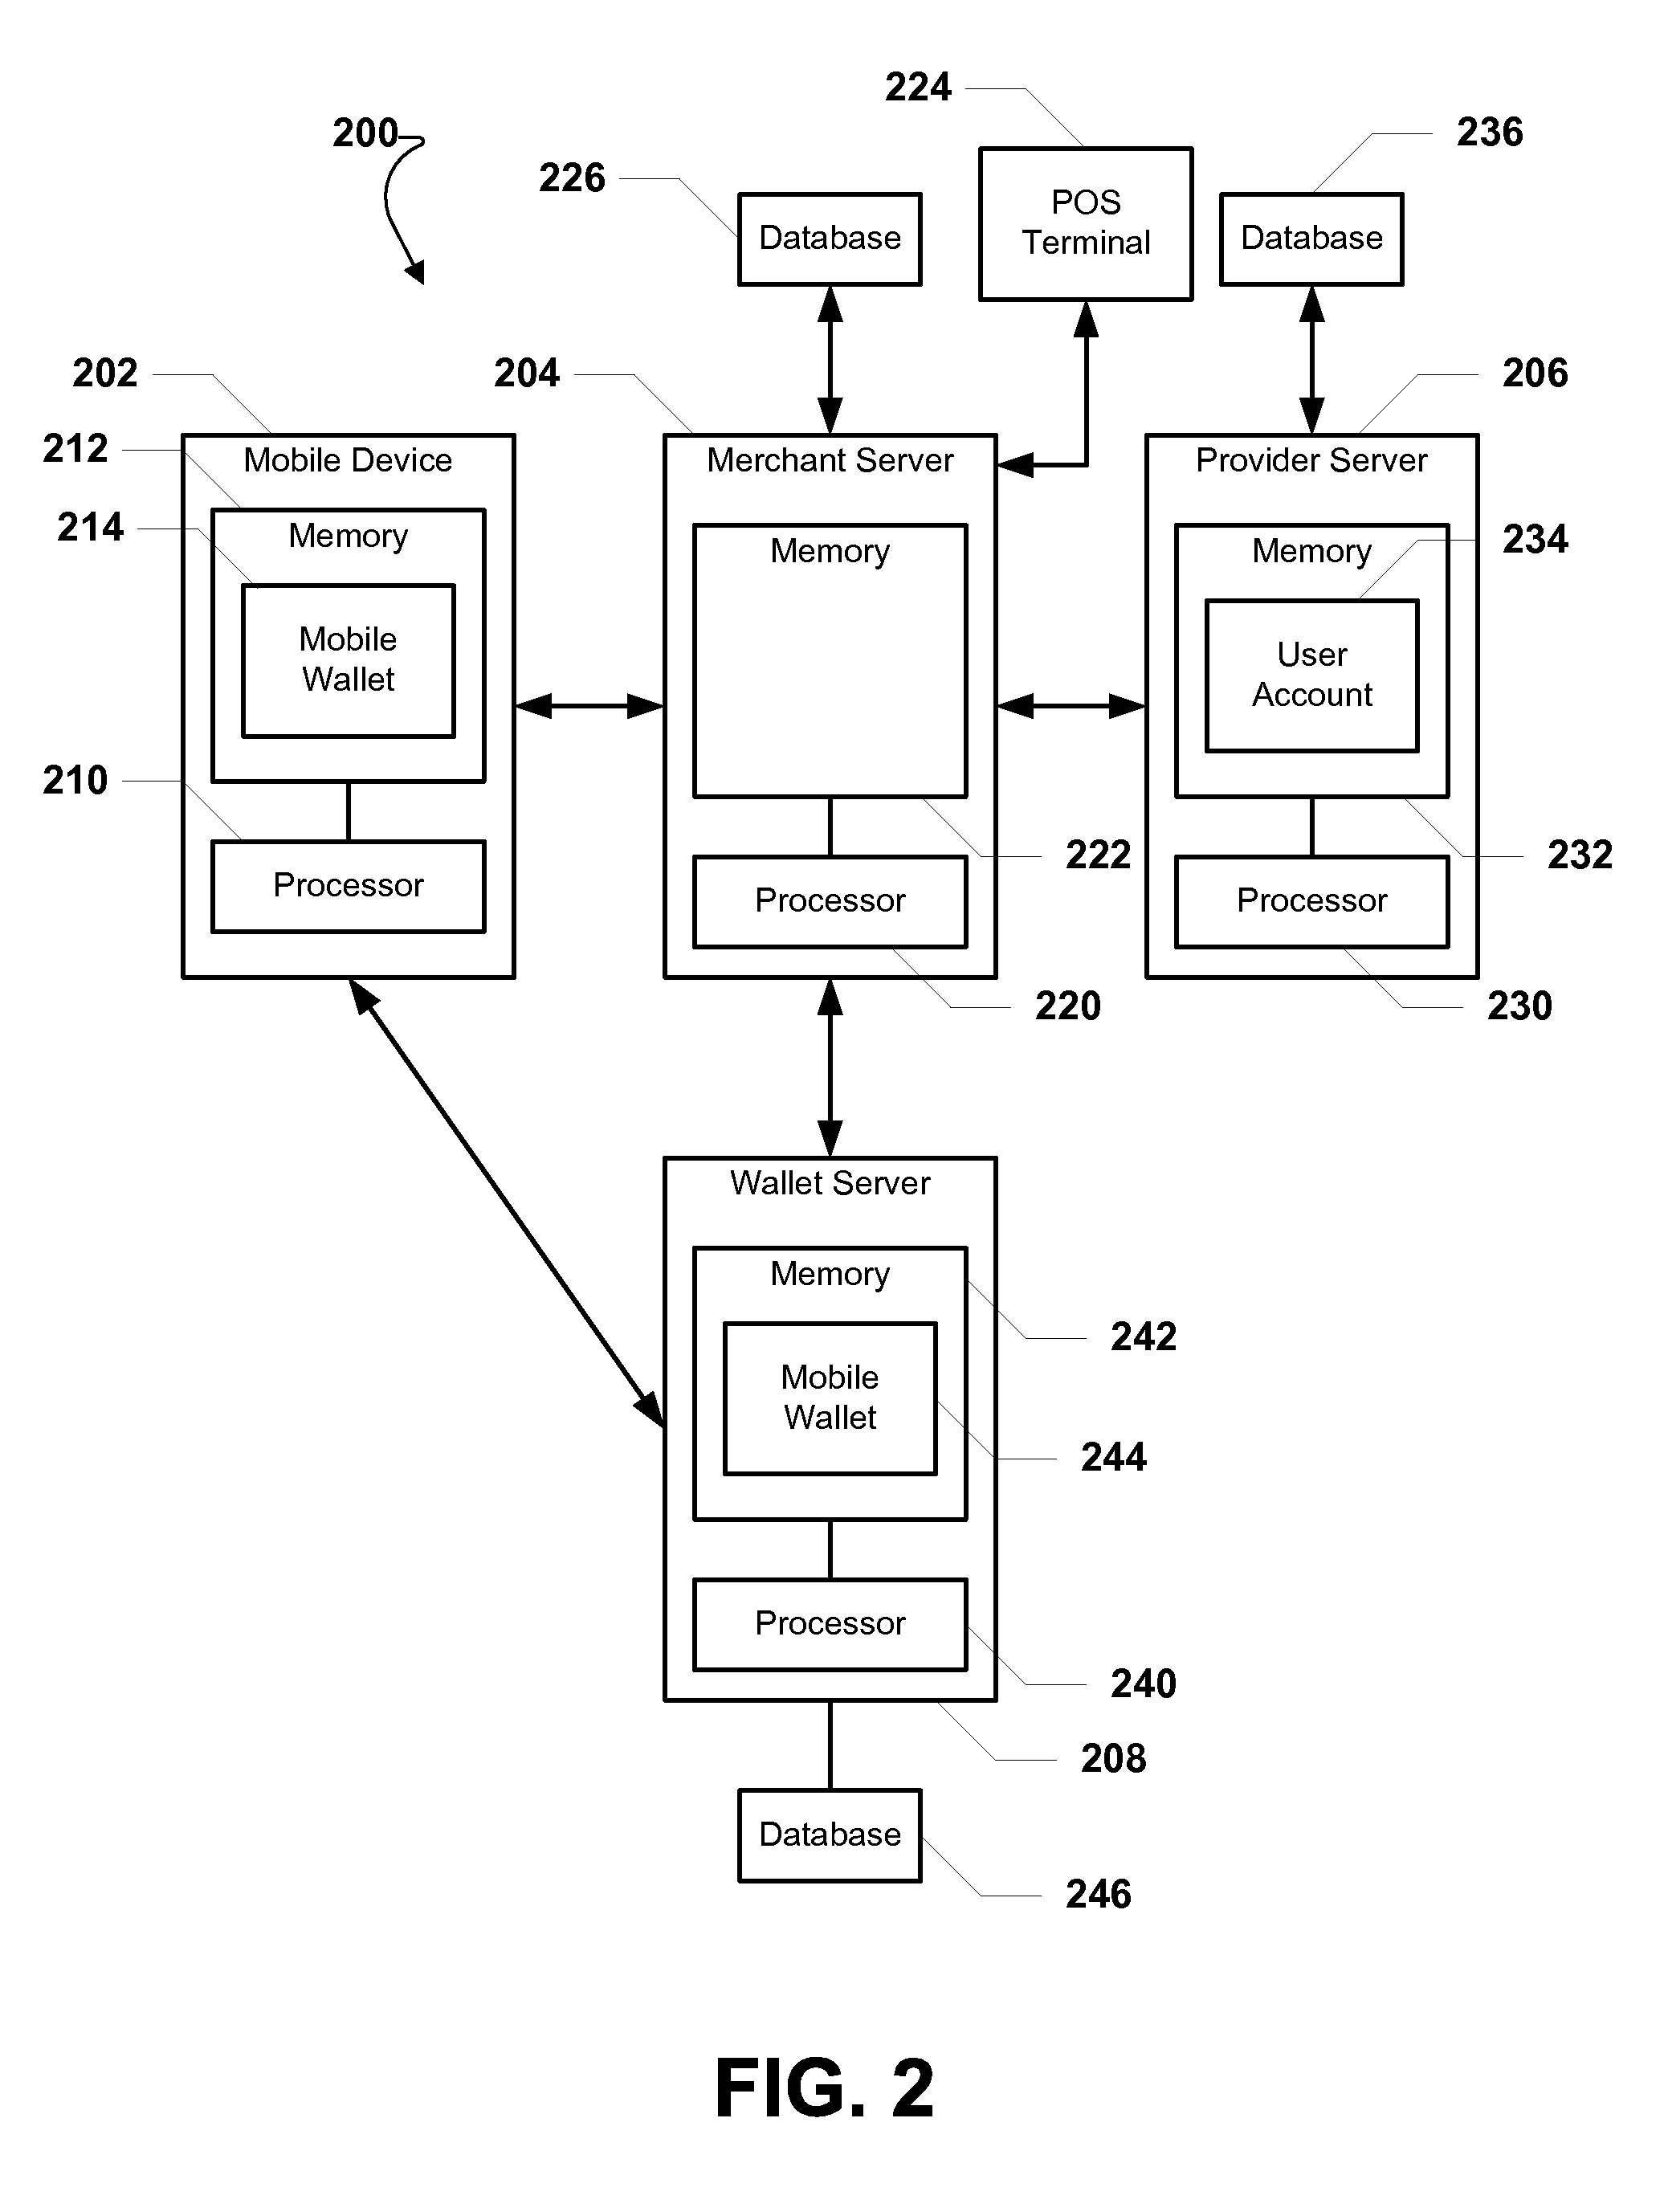 System and method of conducting transactions using a mobile wallet system